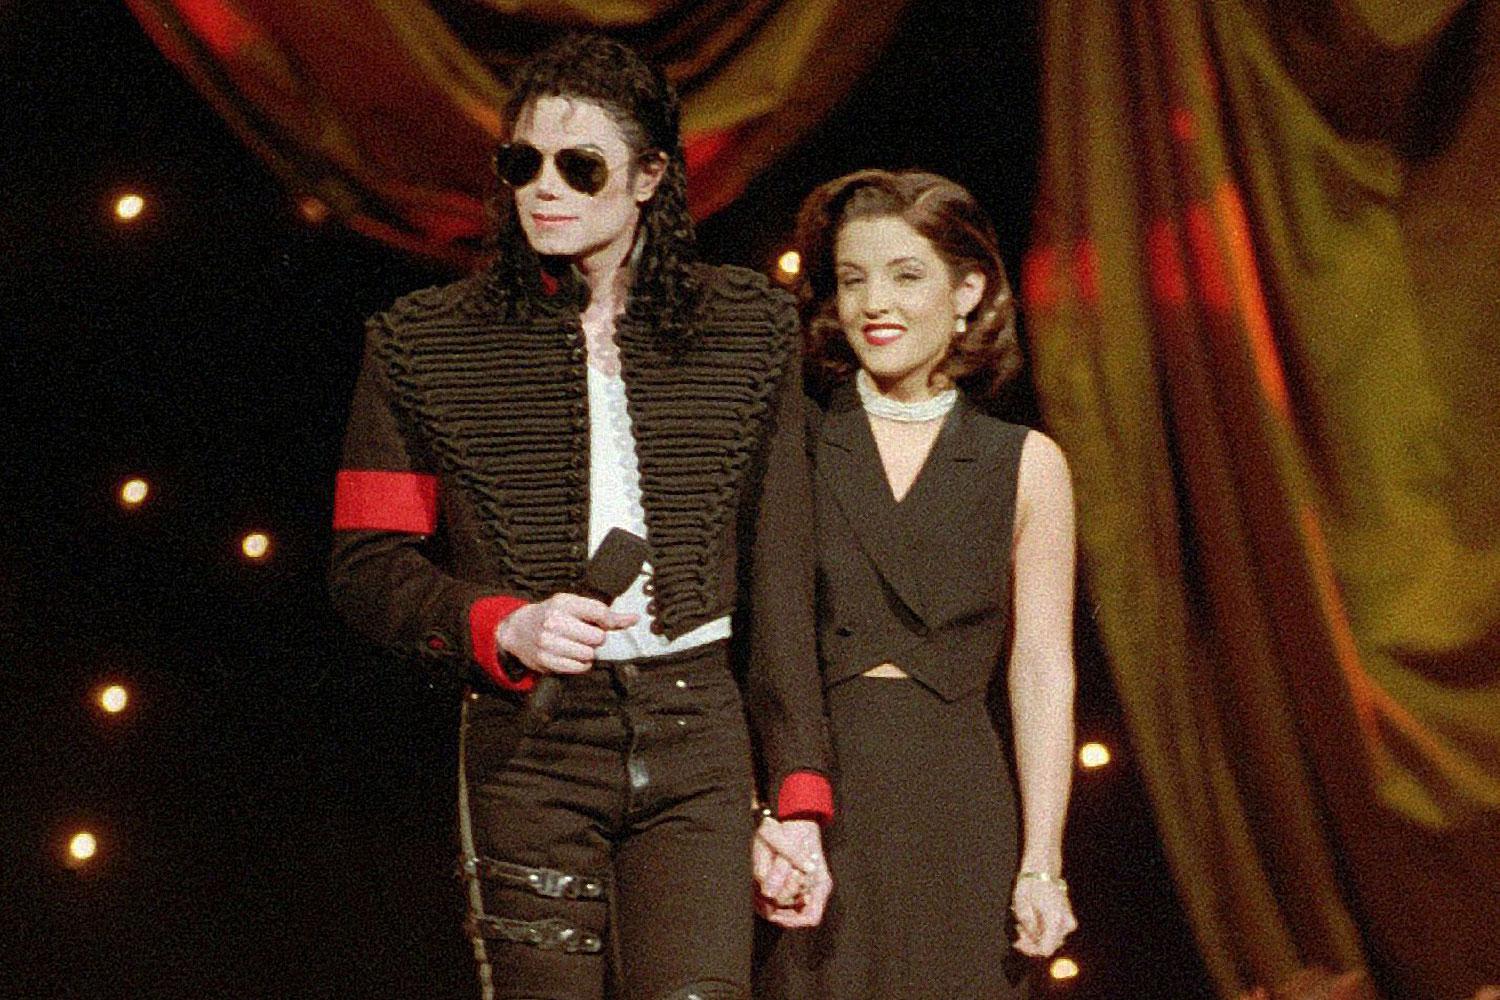 Remembering Lisa Marie Presley And Michael Jacksons Turbulent 2 Year Marriage Nestia